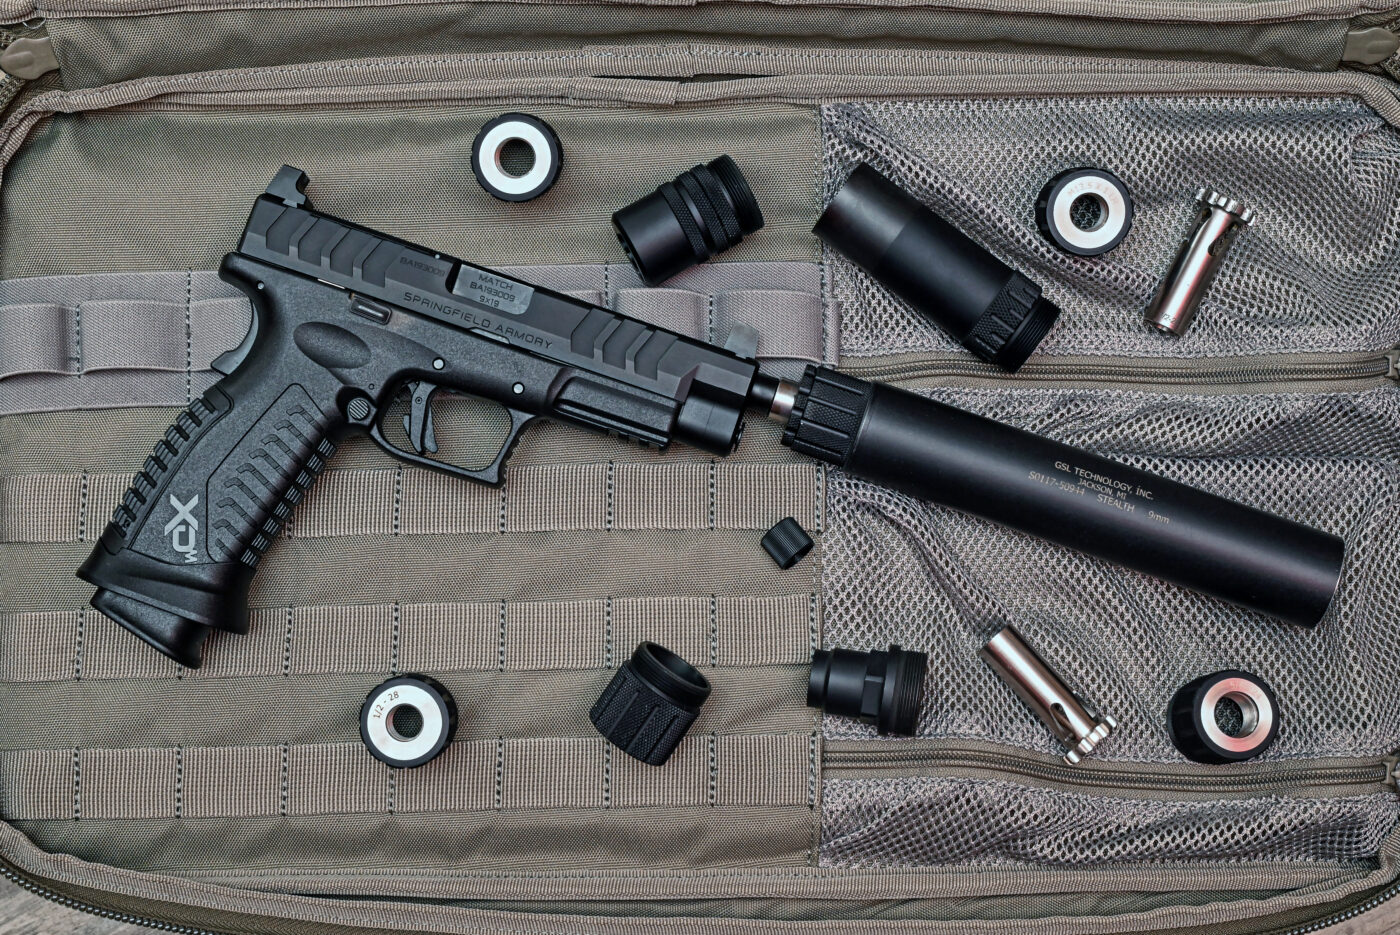 GSL noise suppressor mounted to Springfield XD-M Elite pistol with extra parts nearby